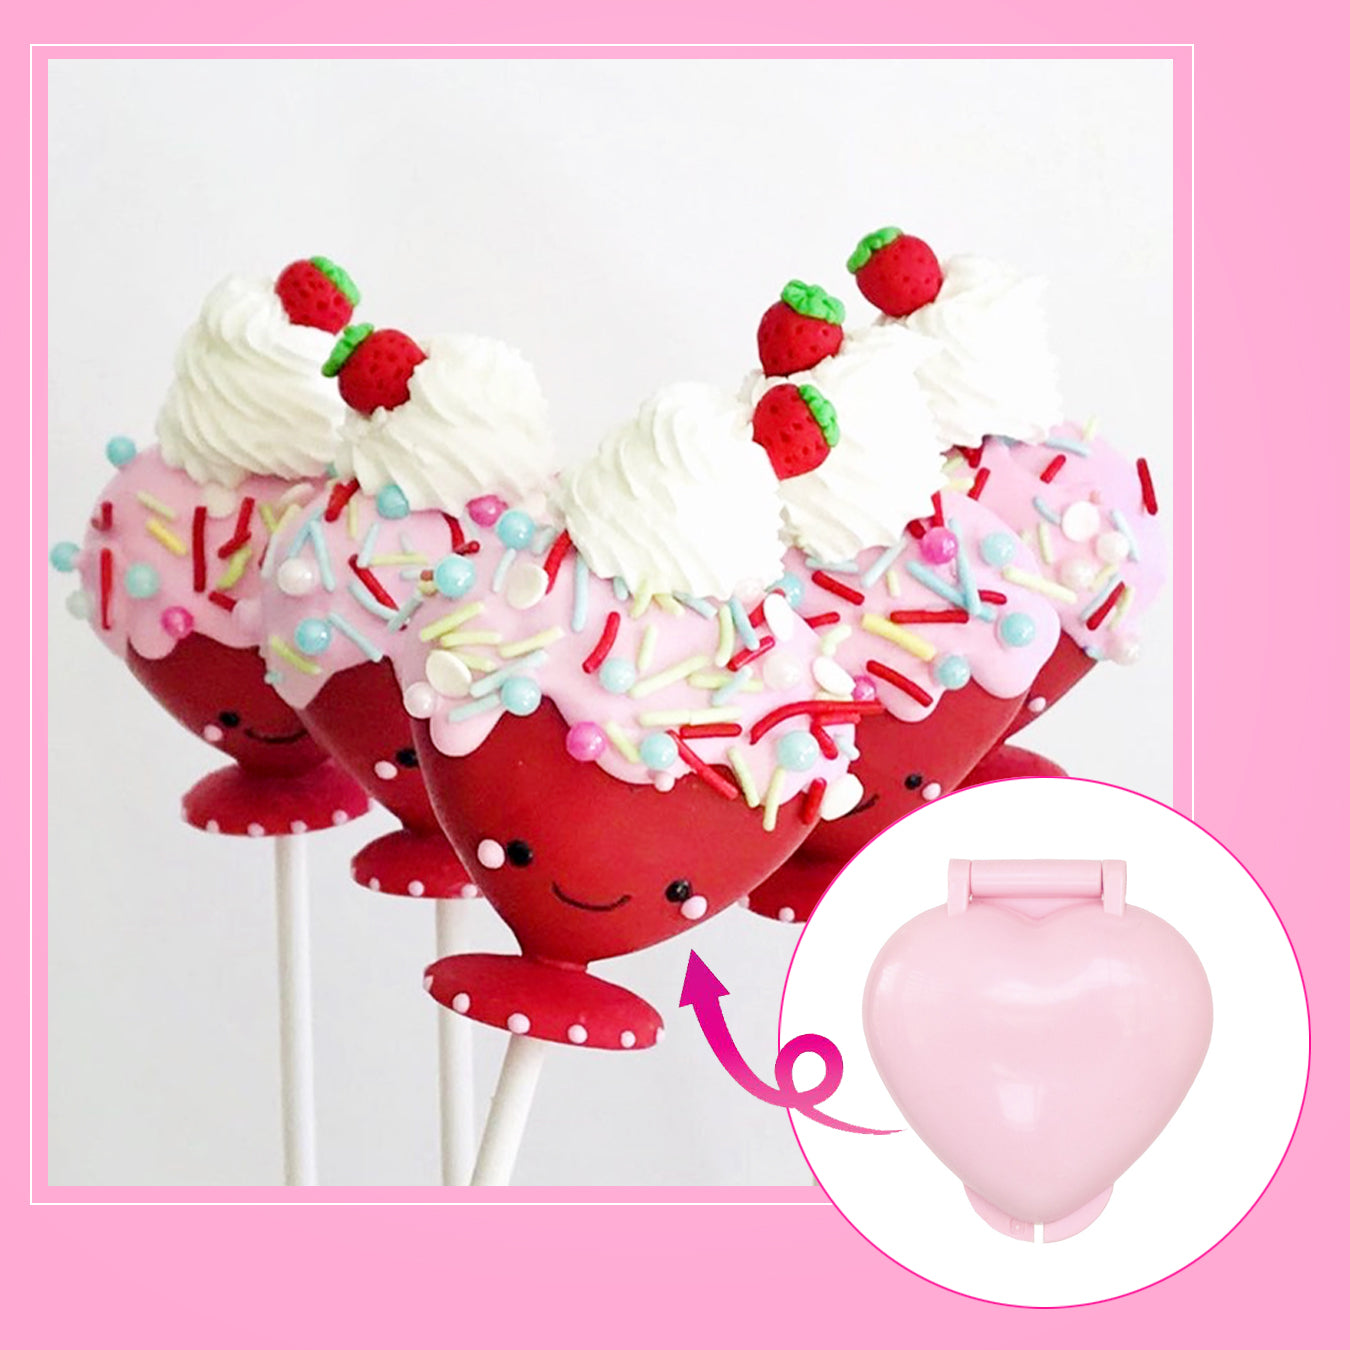 ITS TIMEEEEE!!💗💗 our newest cake pop mold, a Tall Heart Cake, is now